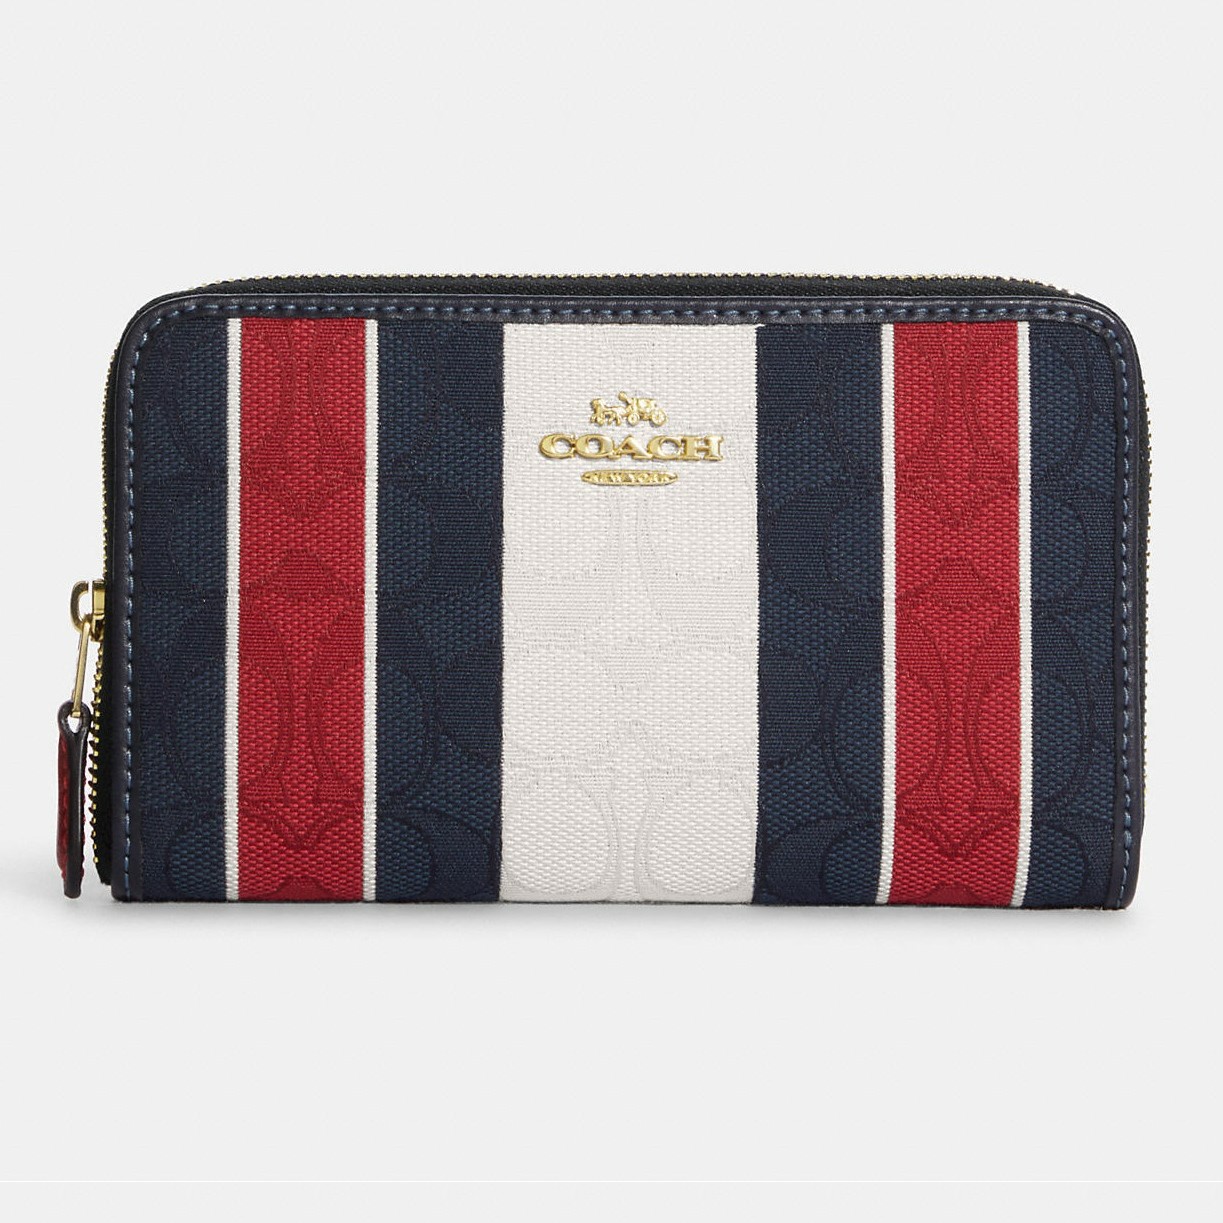 VÍ COACH NỮ MEDIUM ID ZIP WALLET IN SIGNATURE JACQUARD WITH STRIPES 9